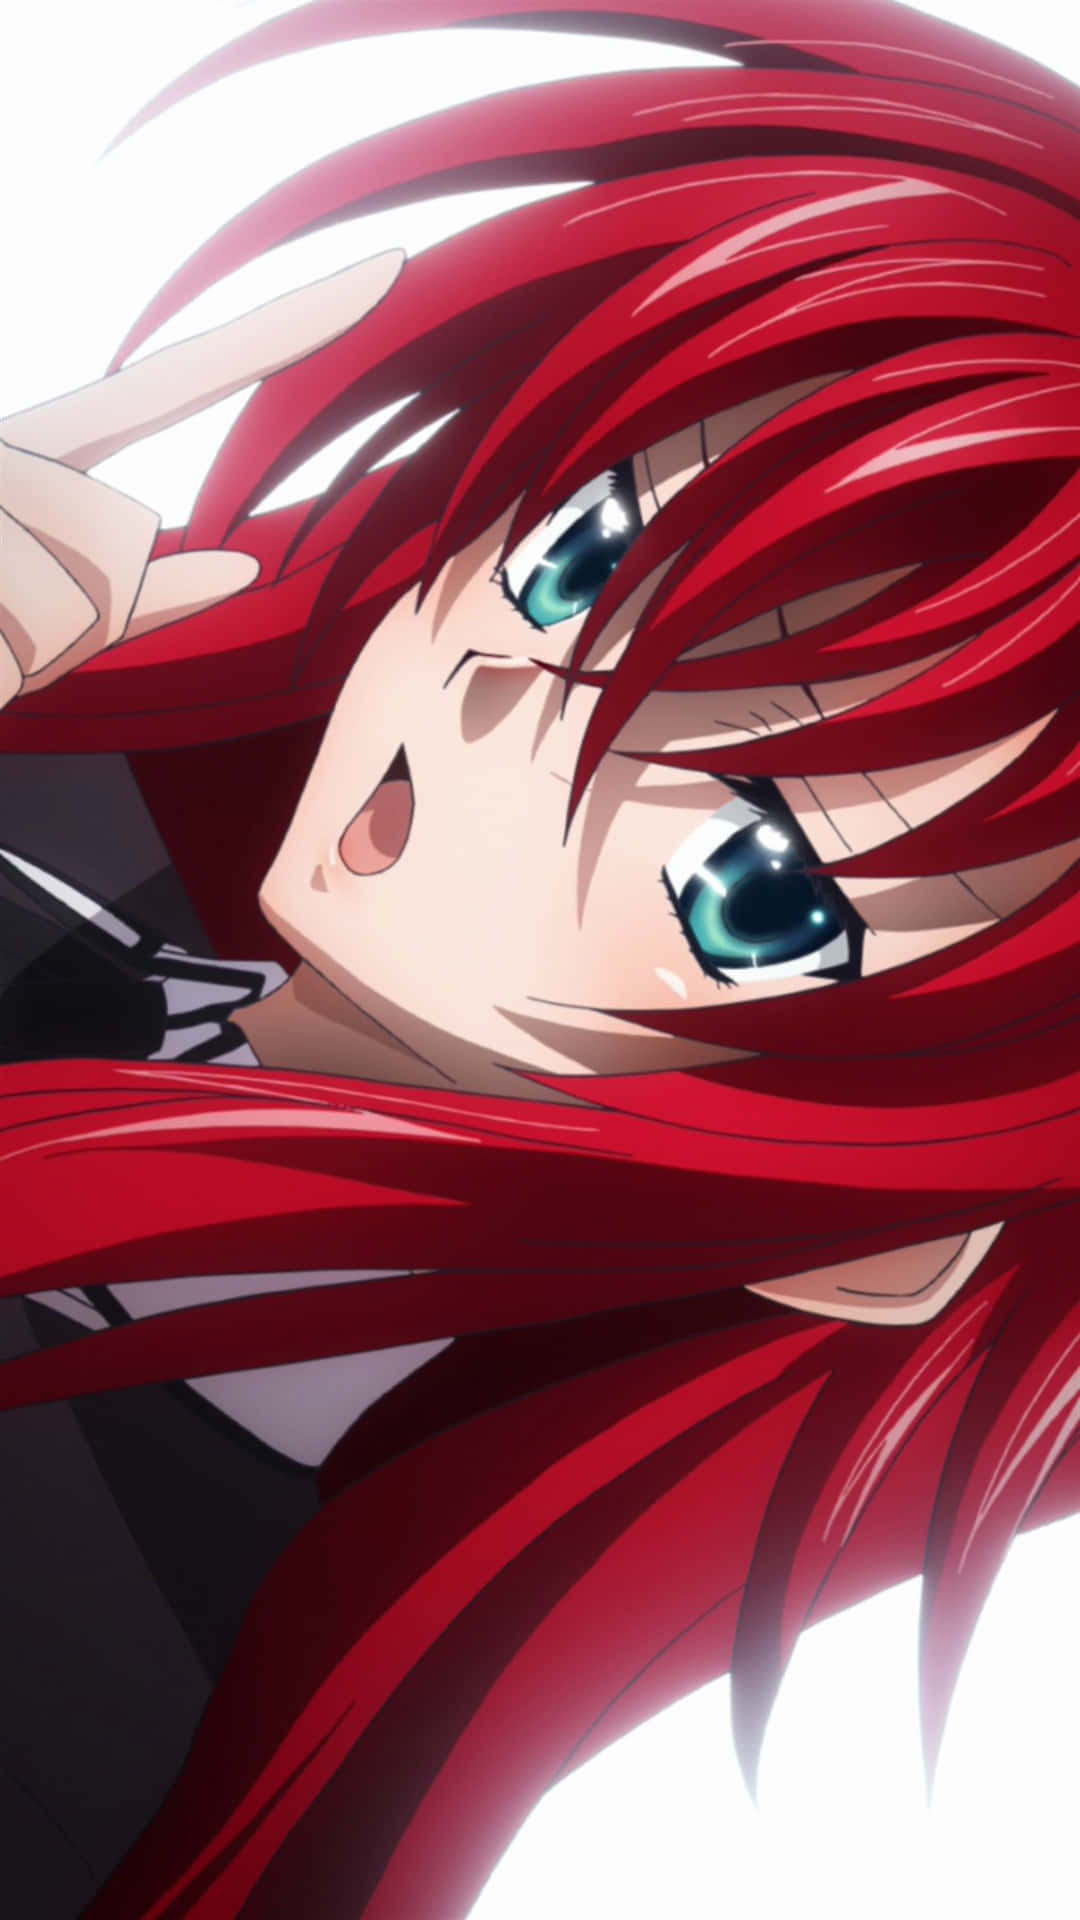 Rias Gremory, the stunning crimson-haired demon Wallpaper